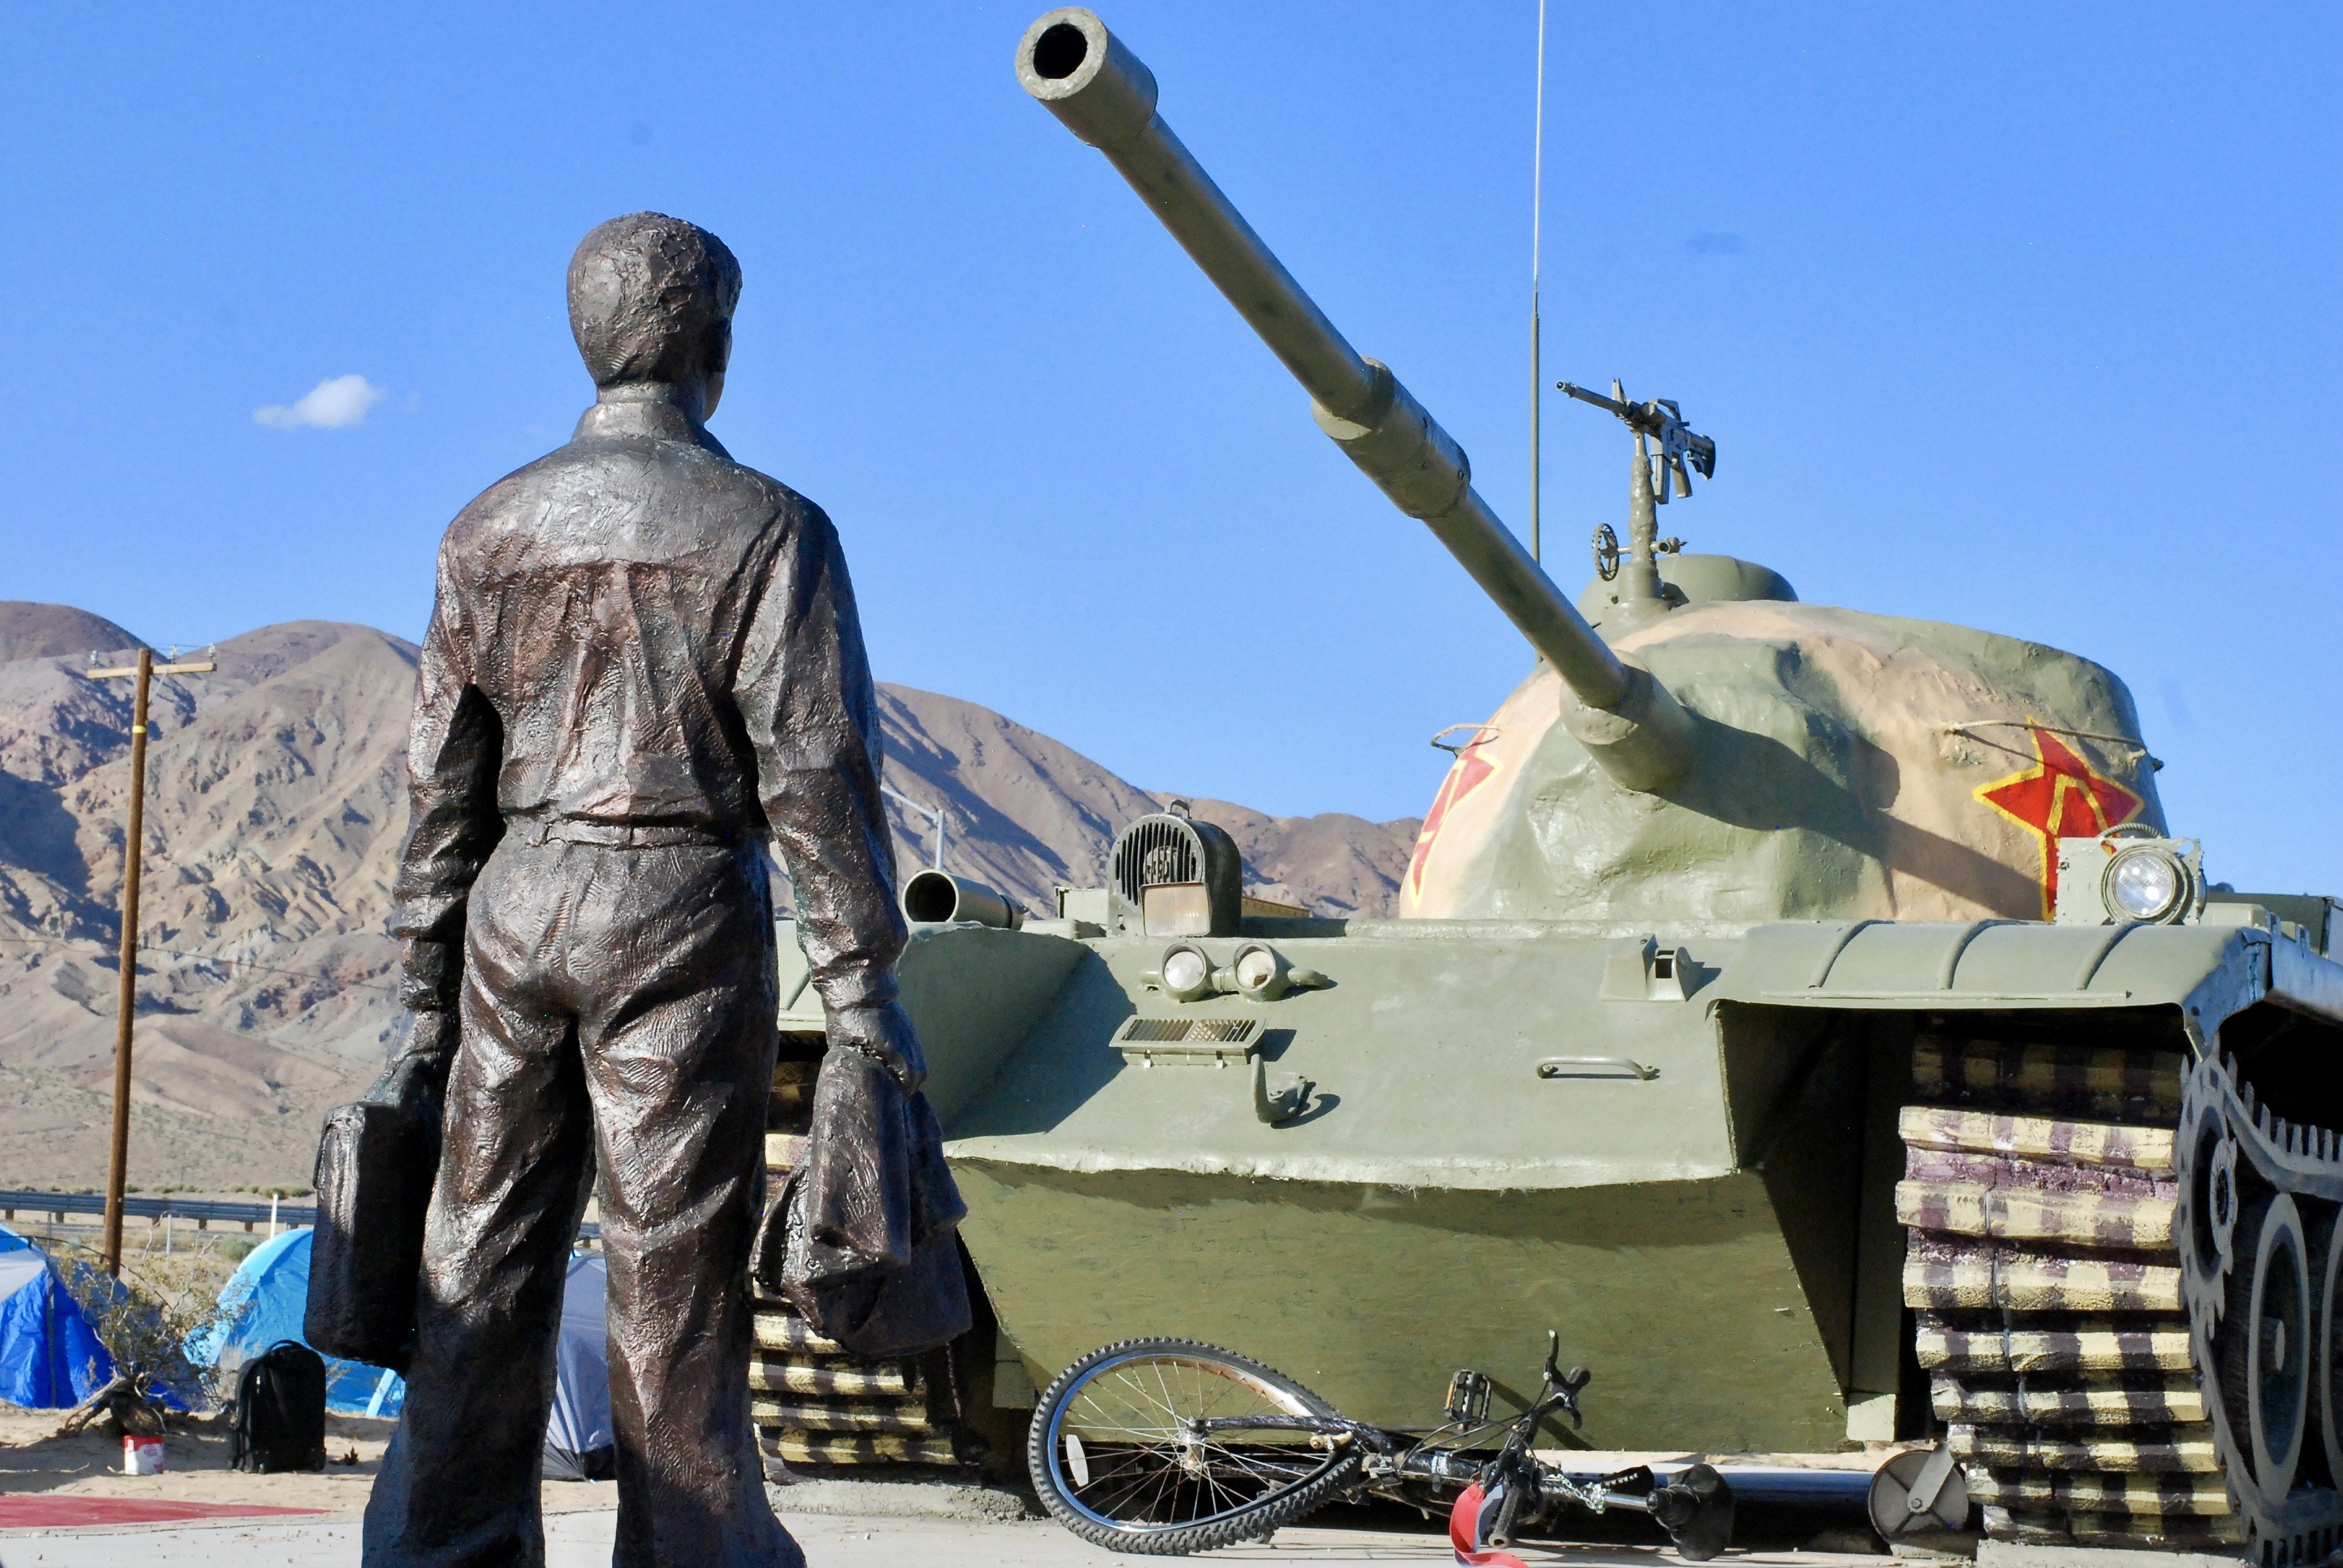 Chen Weiming’s statue stands with a rendering of a Chinese tank in a sculpture park in Yermo, California. Photo: Eileen Guo